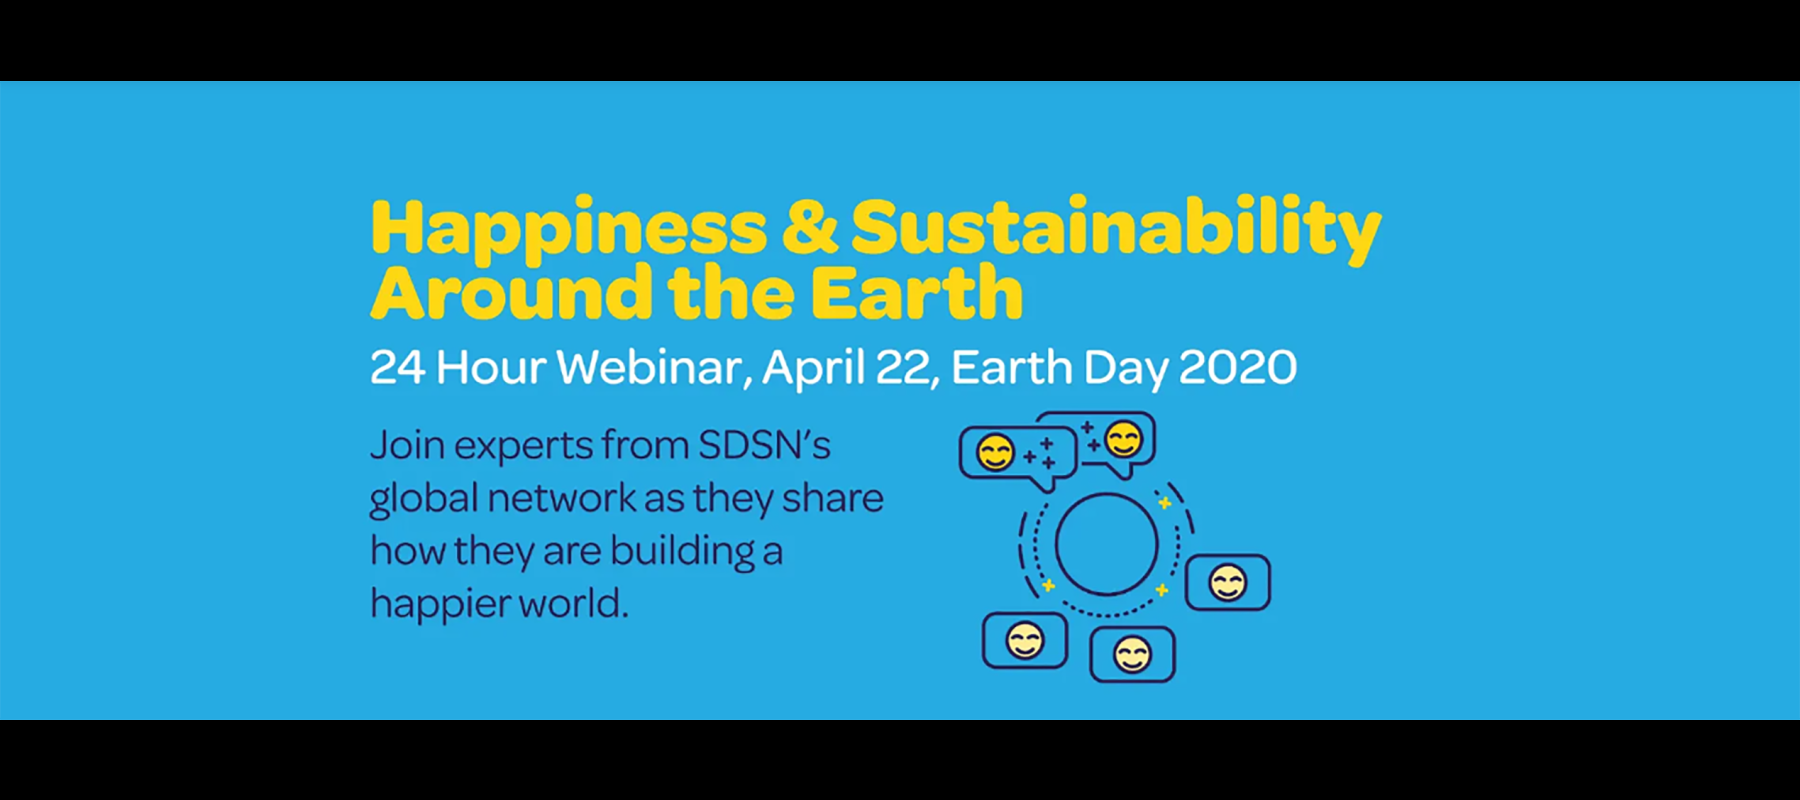 24 Hour Webinar: Happiness & Sustainability Around the Earth